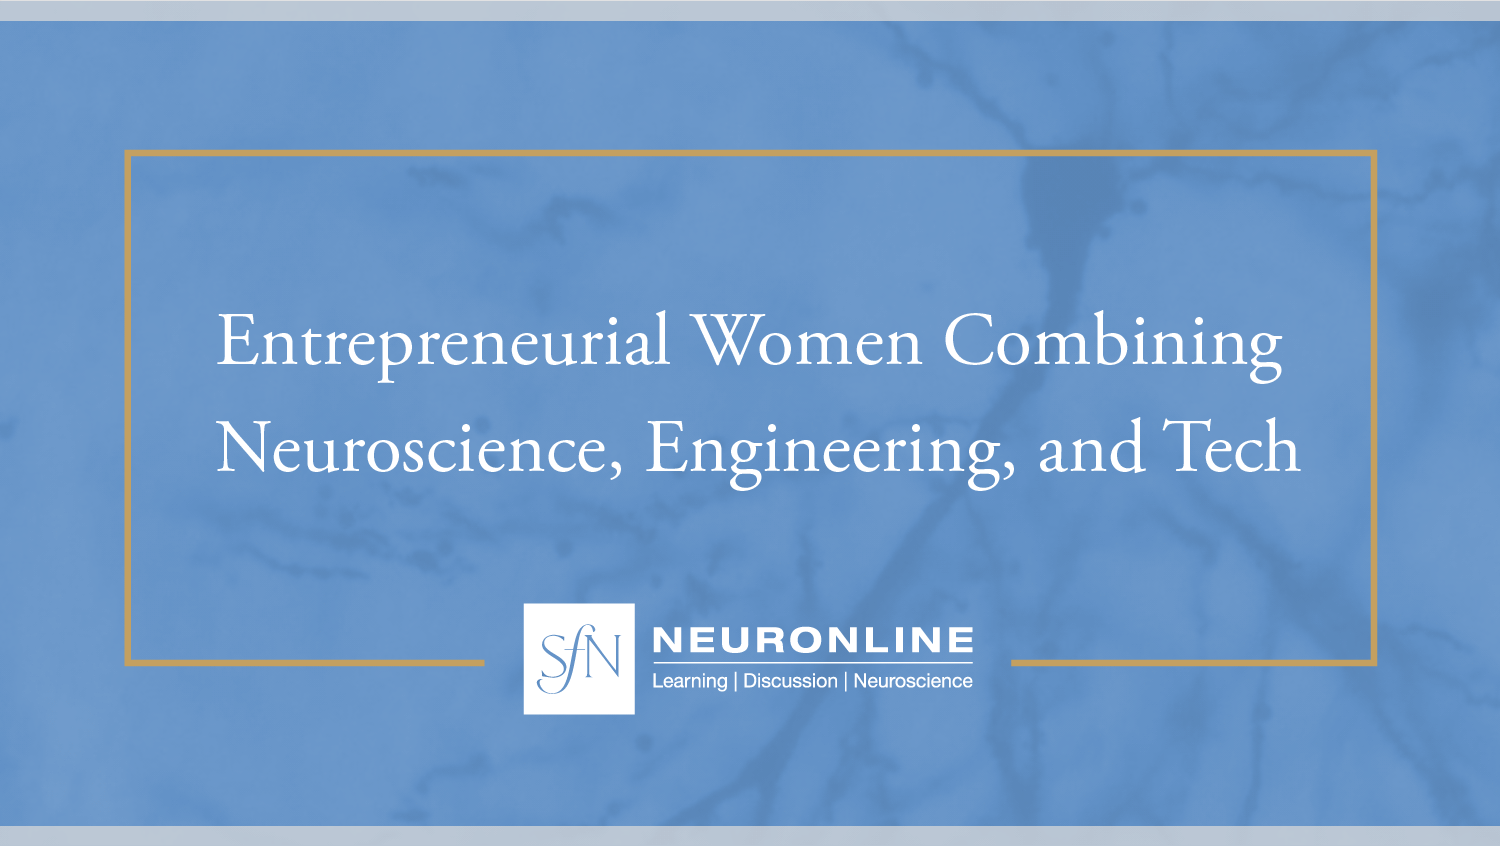 Title card stating "Entrepreneurial Women Combining Neuroscience, Engineering, and Tech" on a blue background with the Neuronline logo below.